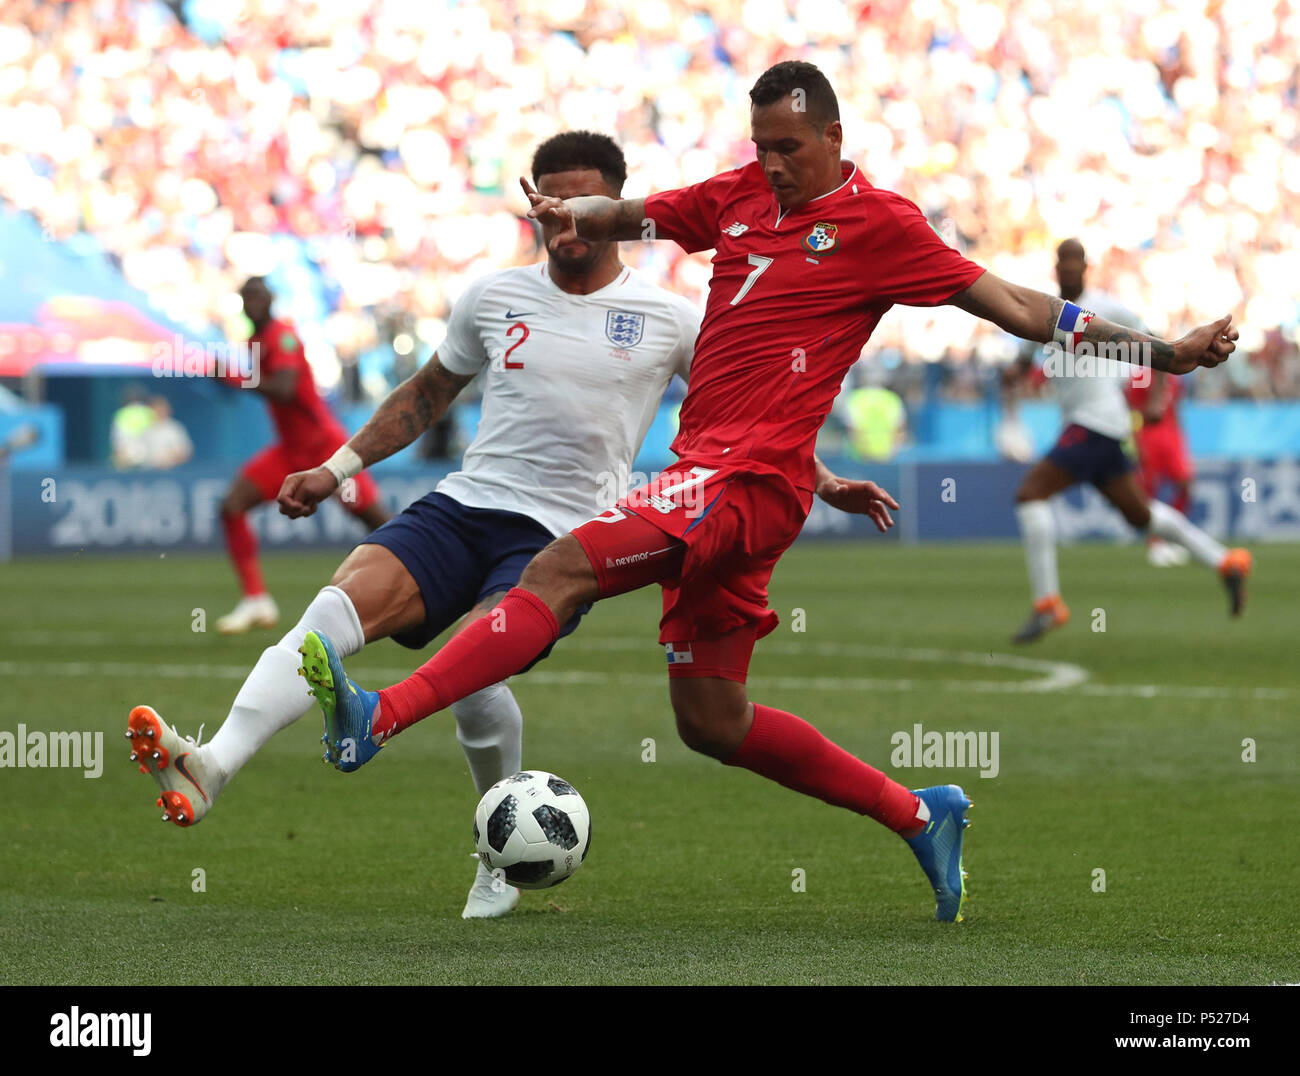 Nizhny Novgorod, Russia. 24th June, 2018. Kyle Walker (L) of England vies with Blas Perez of Panama during the 2018 FIFA World Cup Group G match between England and Panama in Nizhny Novgorod, Russia, June 24, 2018. England won 6-1. Credit: Cao Can/Xinhua/Alamy Live News Stock Photo